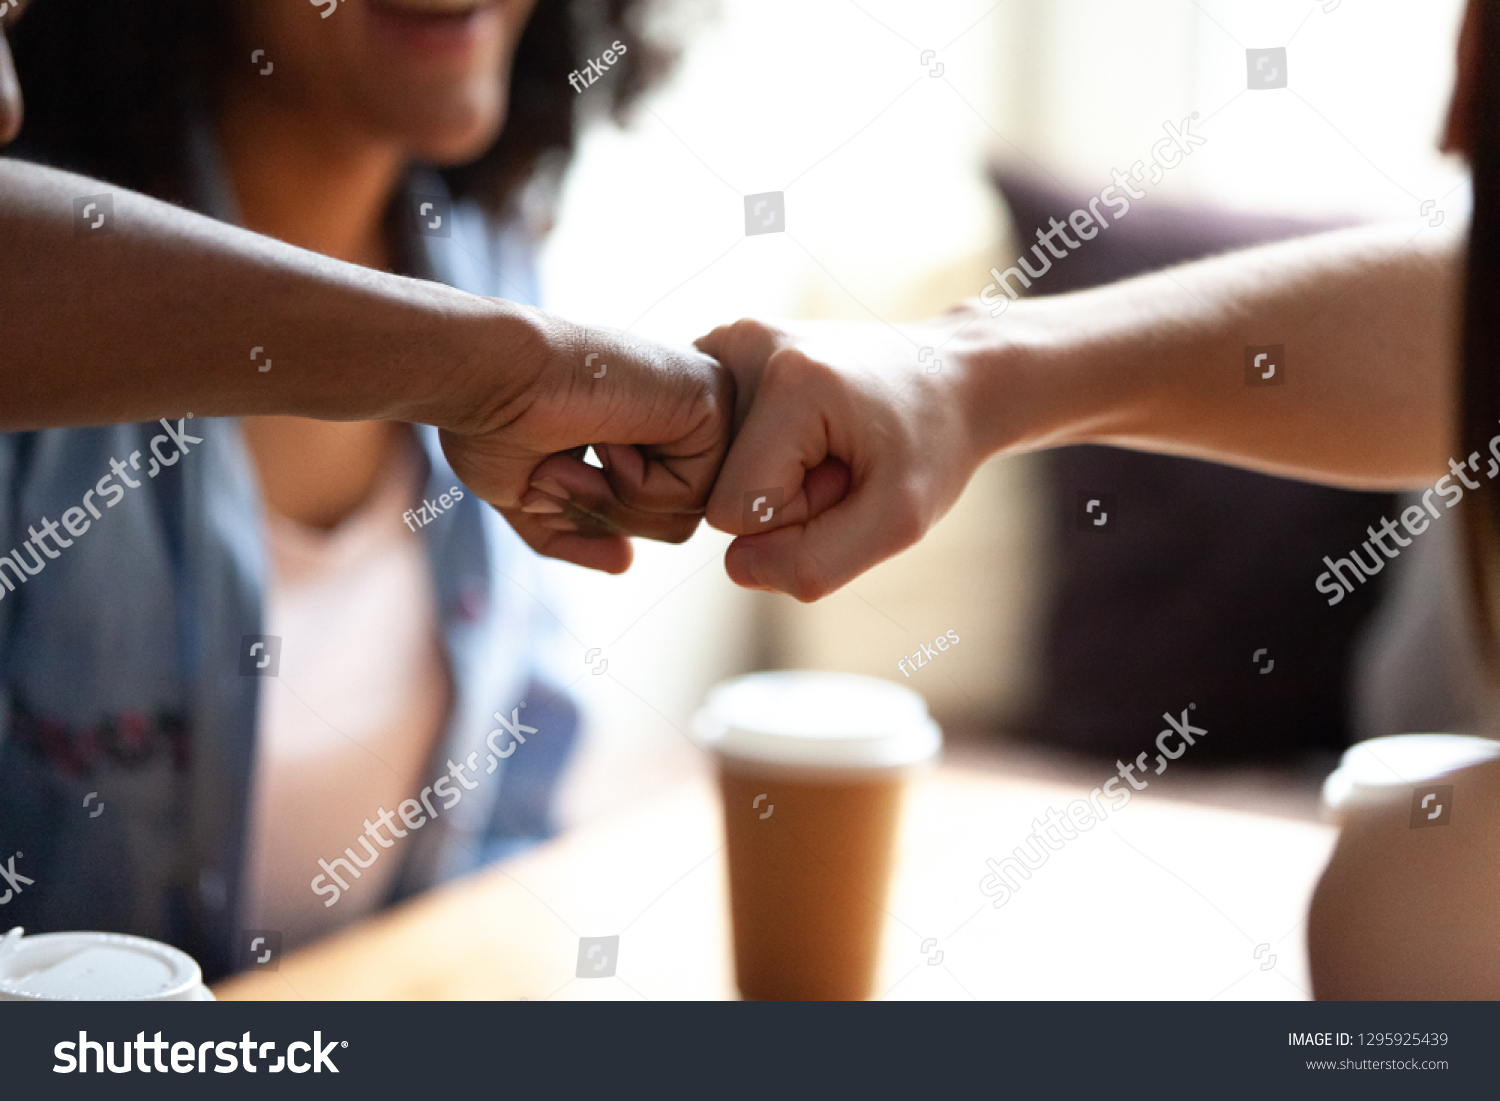 Close up multiracial best friends fist bumping, greeting each other, students celebrating successful exam results together, sitting in cafe, drinking coffee, symbol giving respect #1295925439